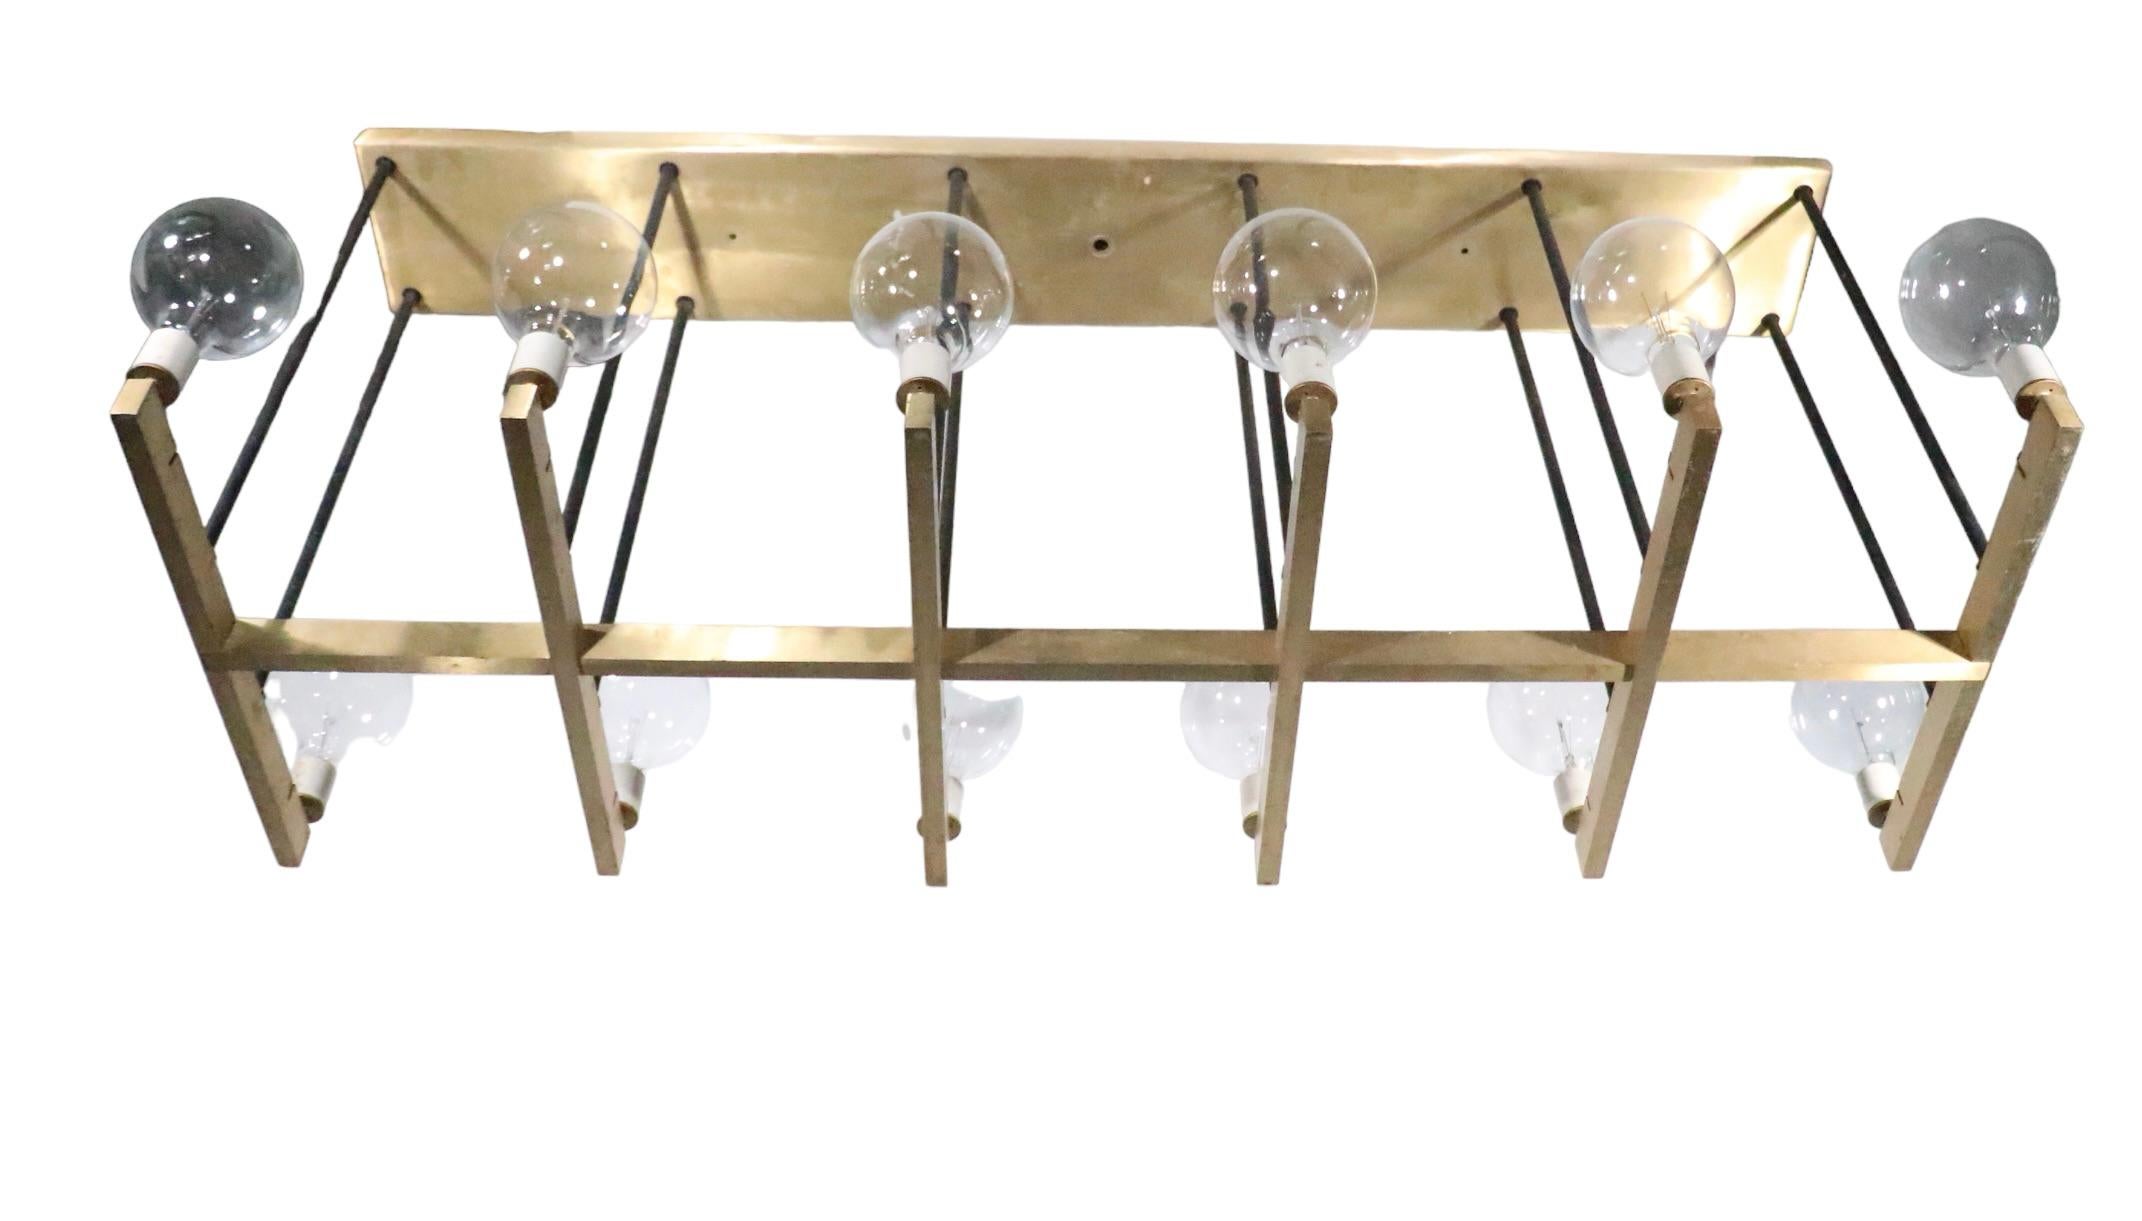 American 12 Light Mid Century Architectural Scale Chandelier Fixture C 1950/1970s For Sale